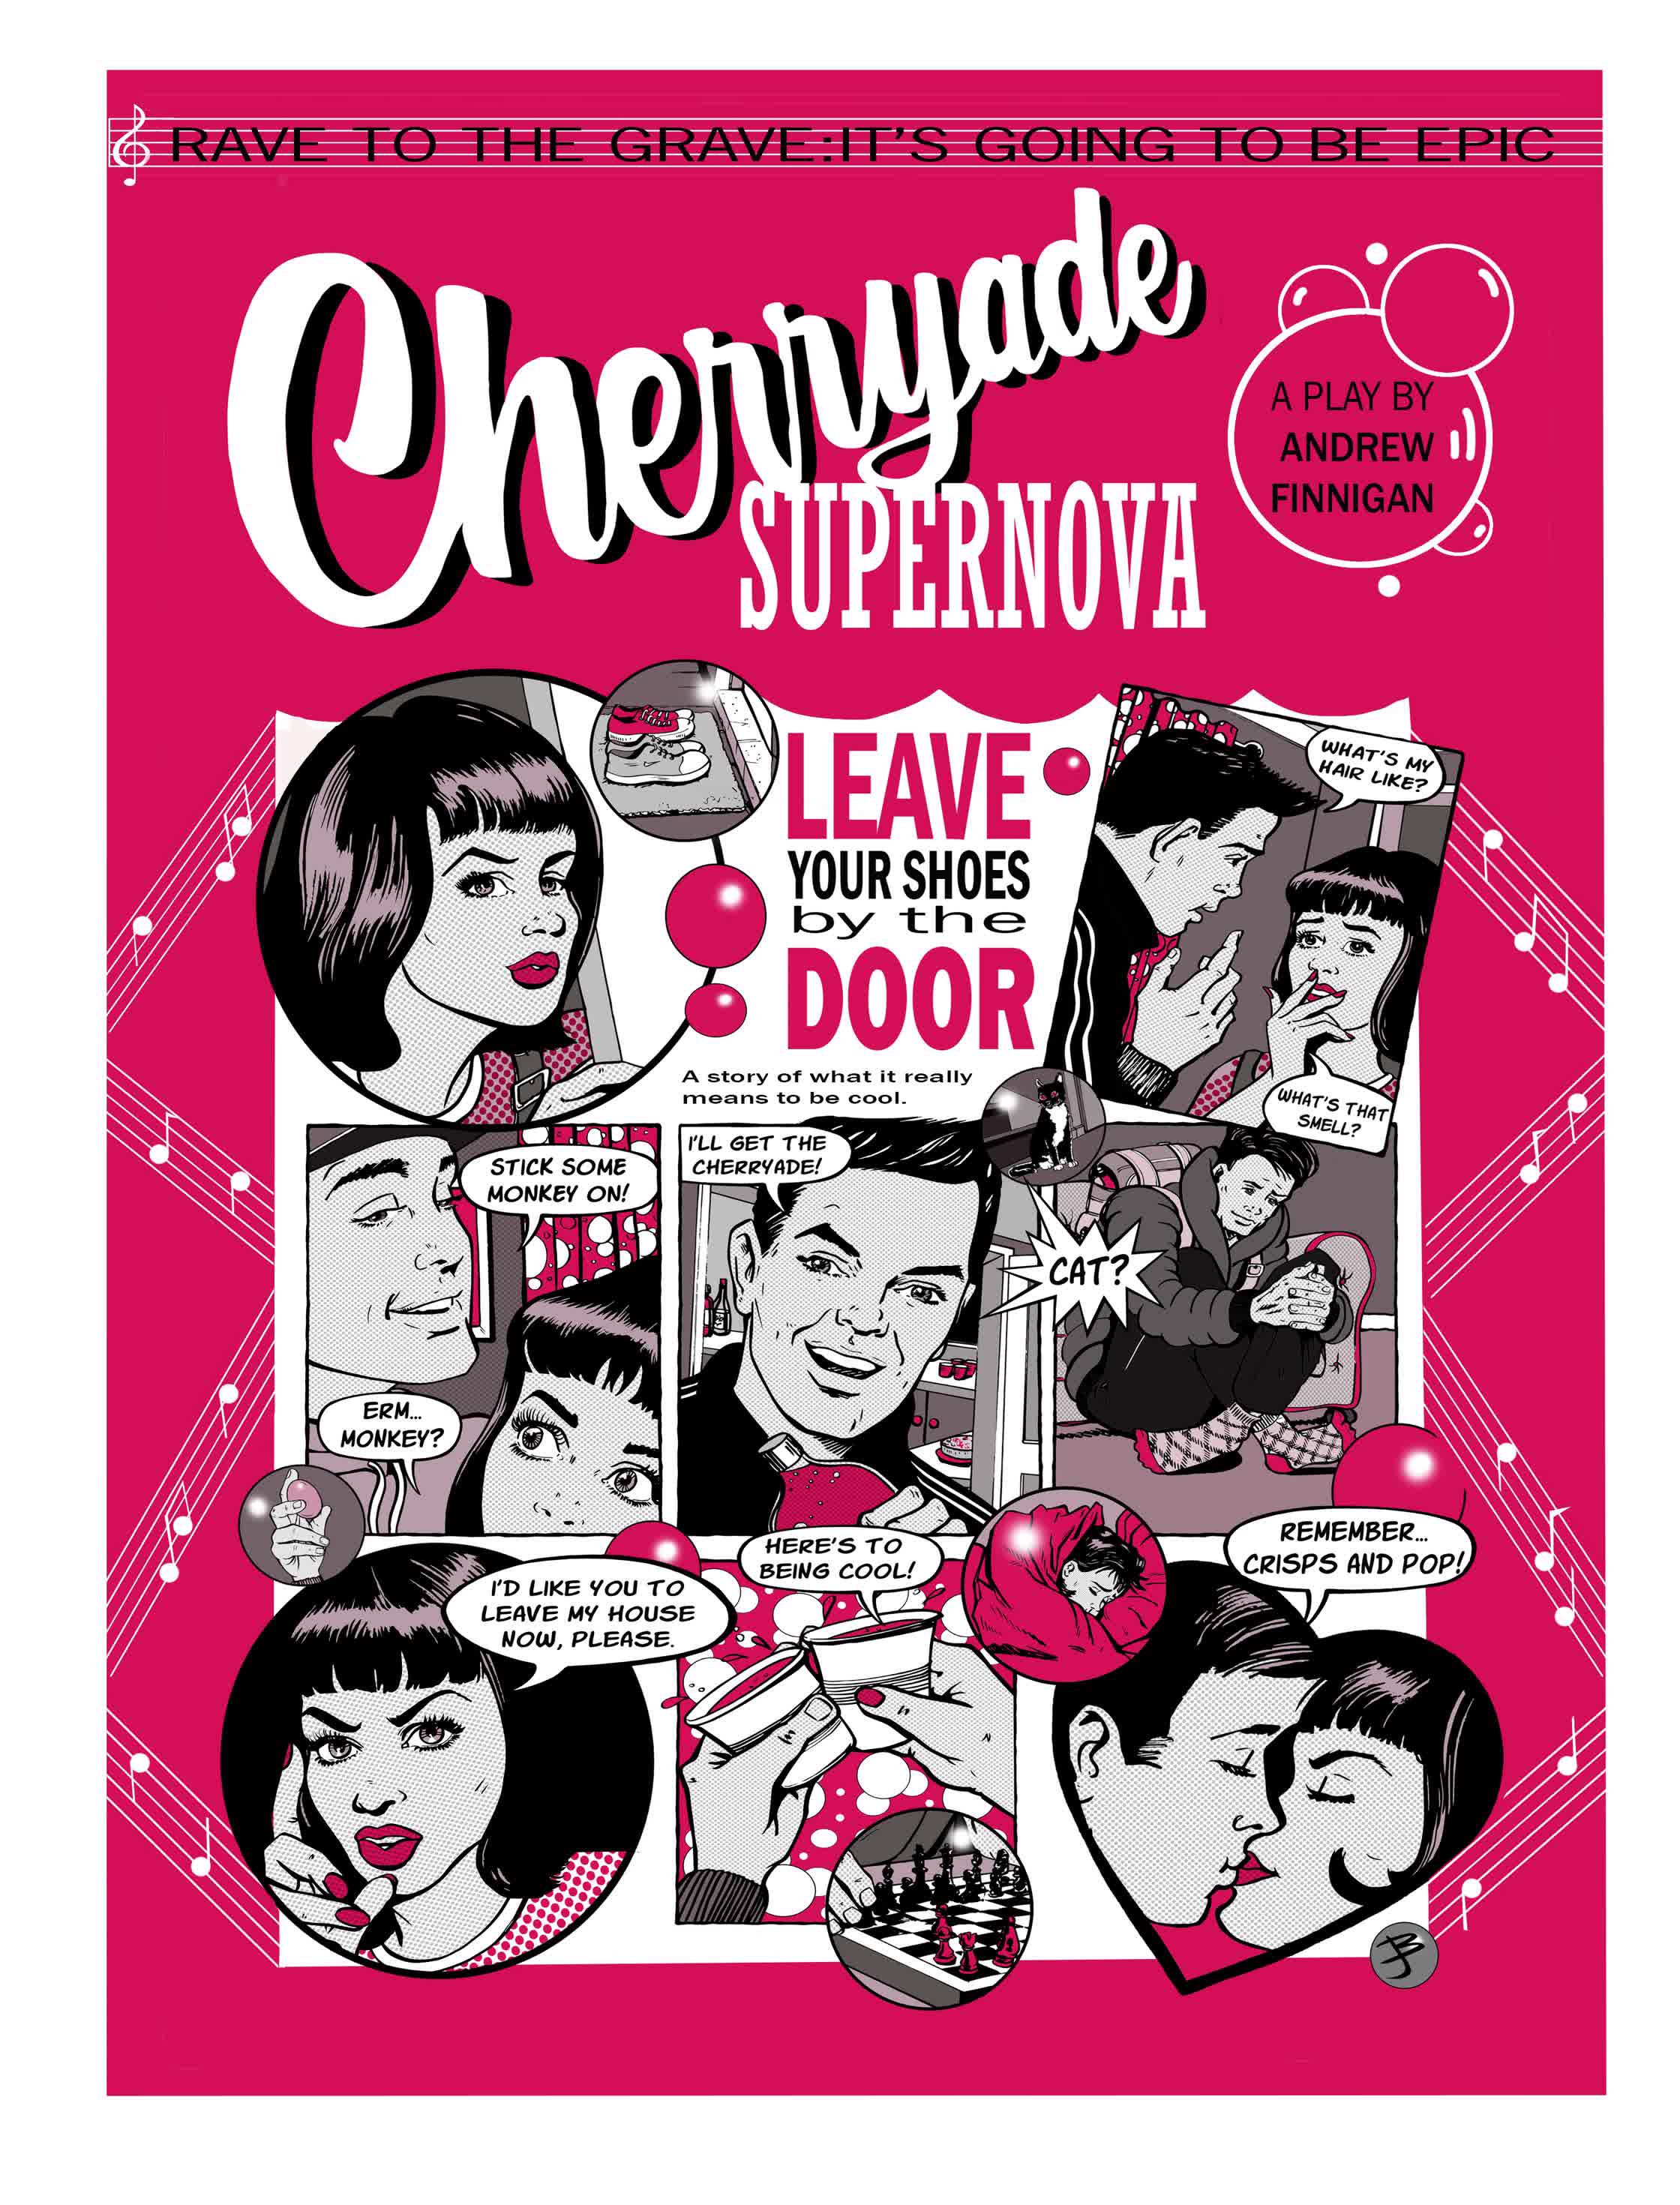 CHERRYADE SUPERNOVA Graphics and poster for independent play at Customs House, South Shields 2021.jpg